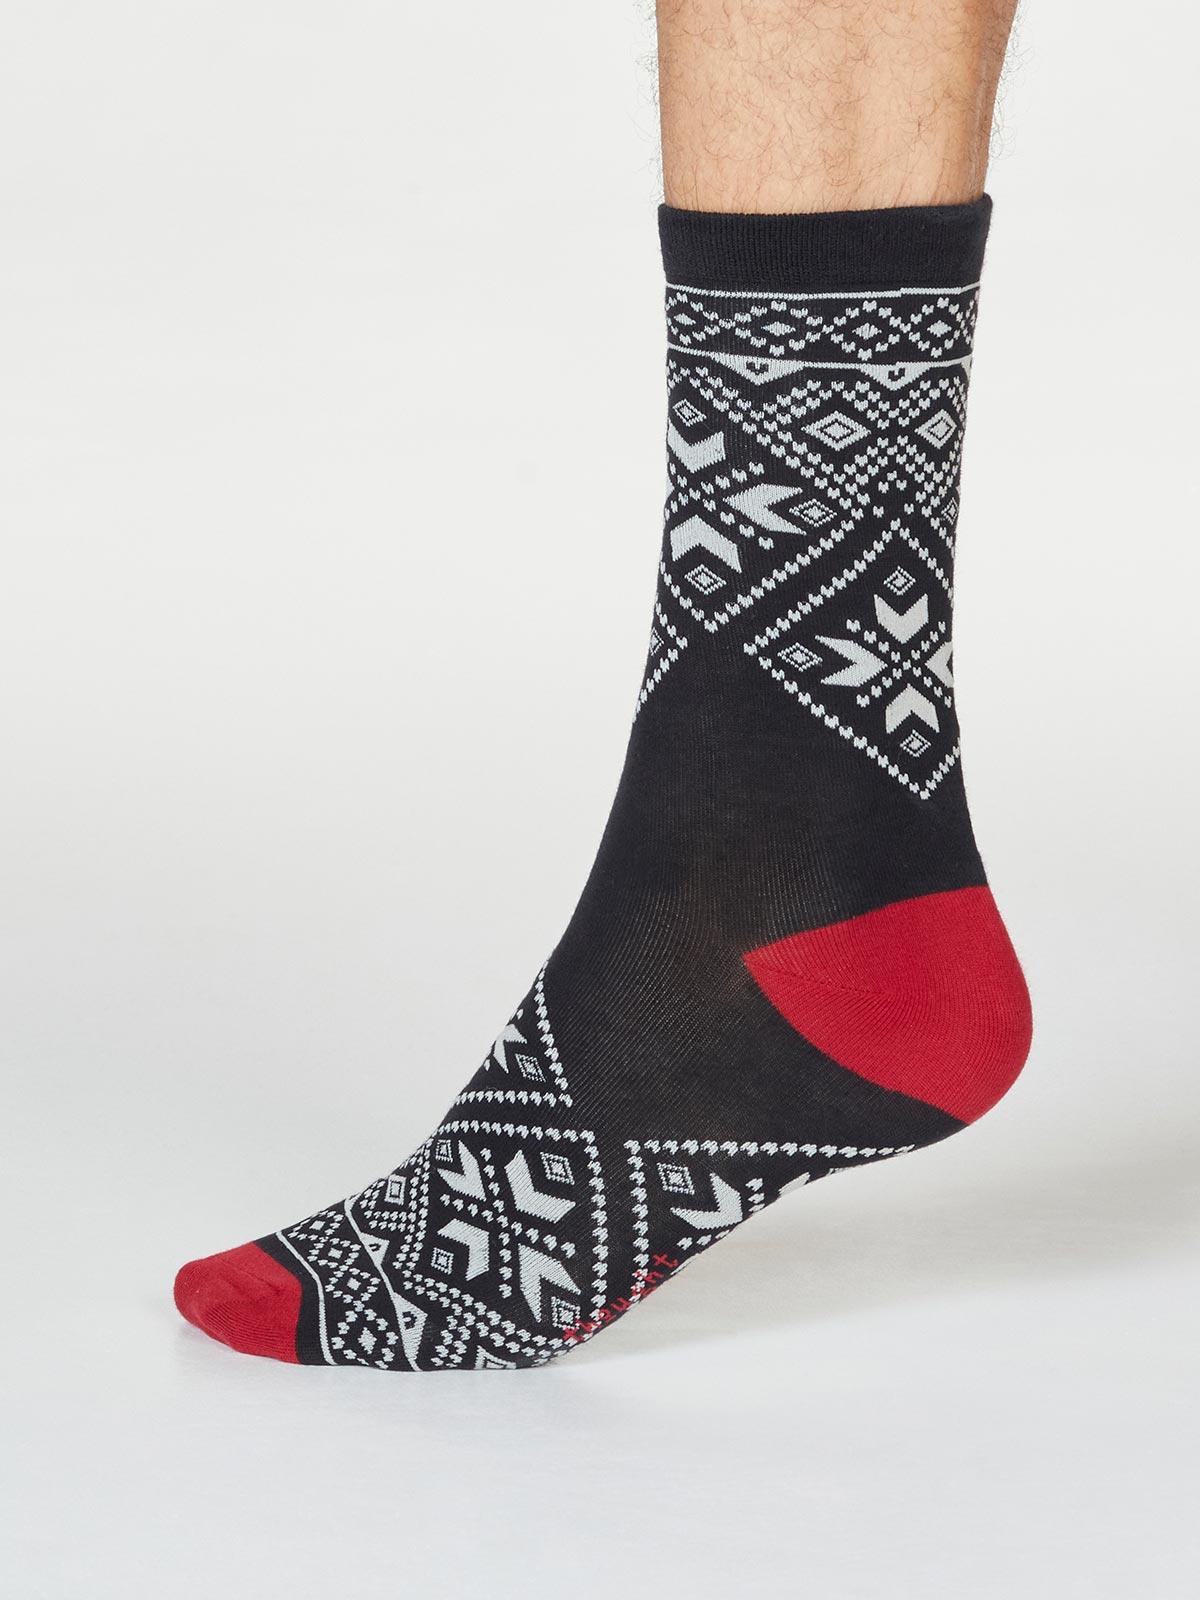 Hector Christmas Jumper Socks In A Bag - Black - Thought Clothing UK